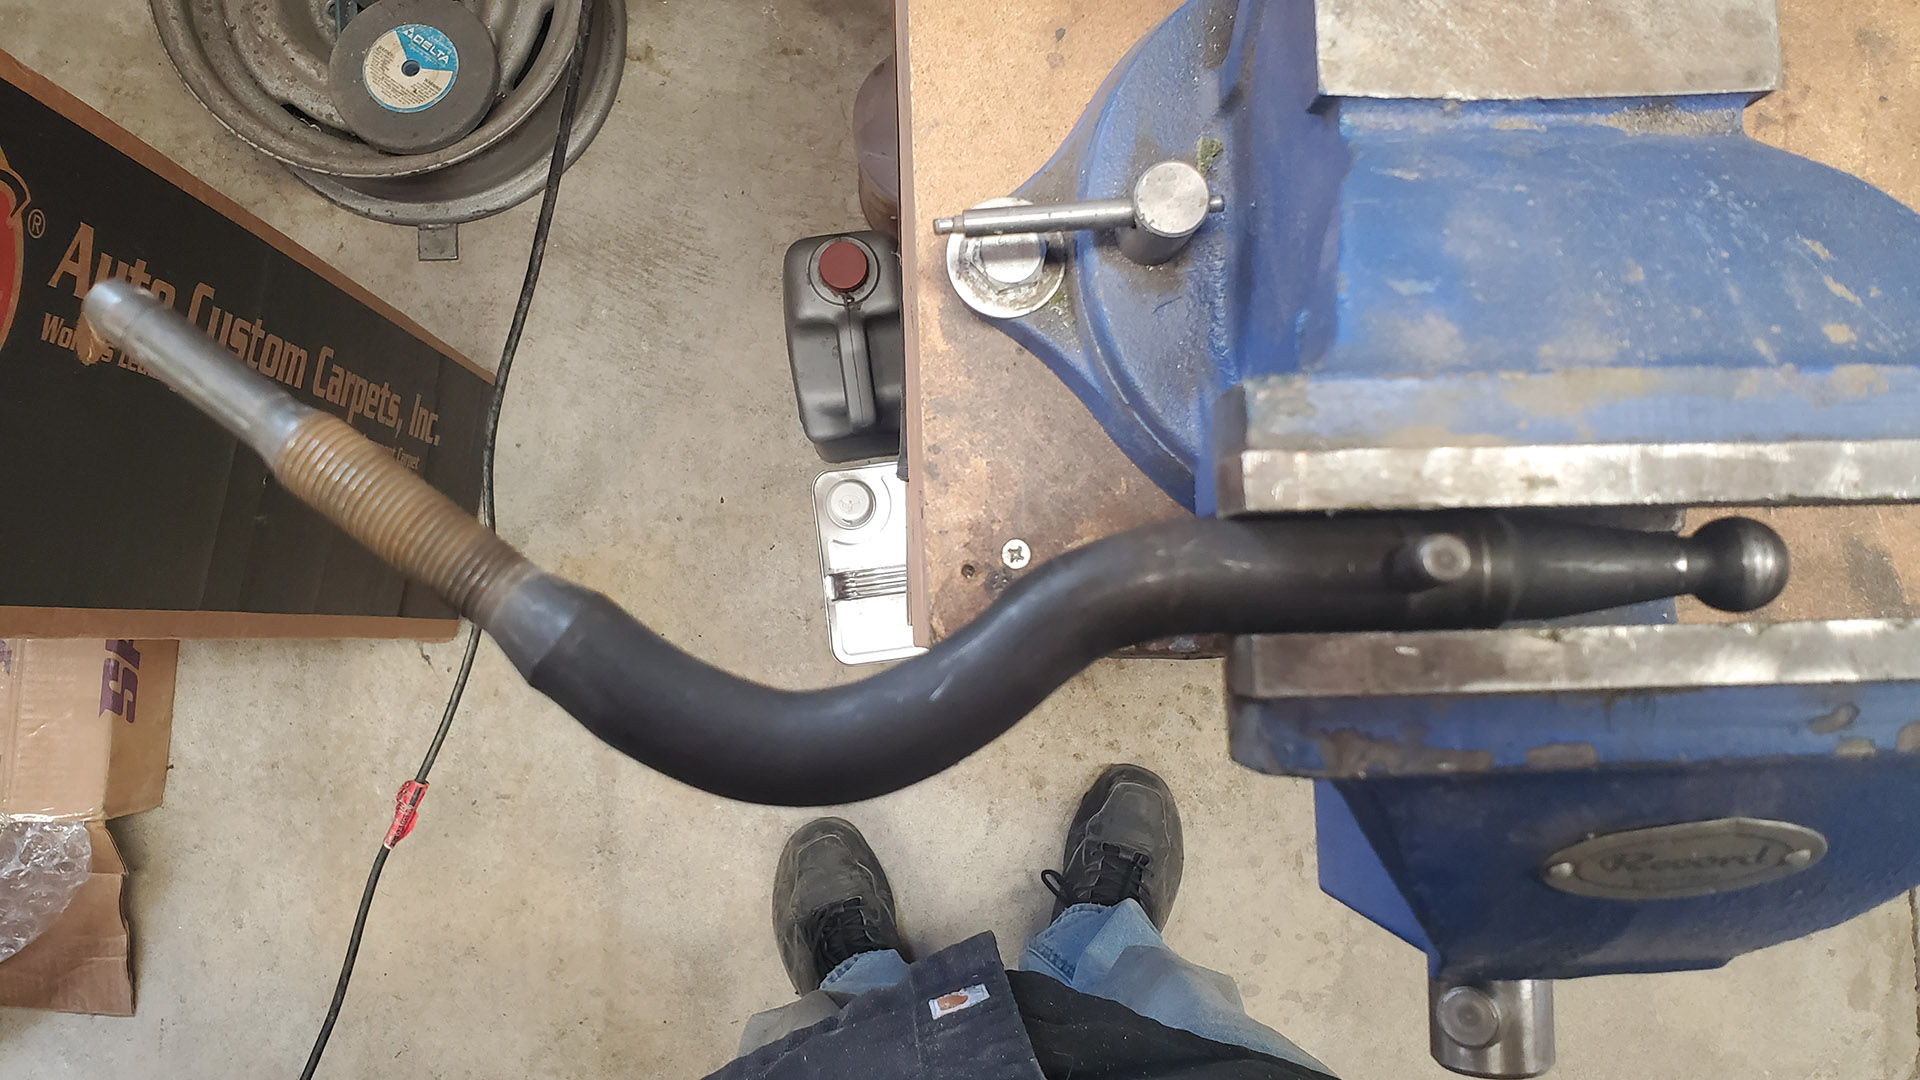 Shifter stub shaft was straightened to take some of the bend out.